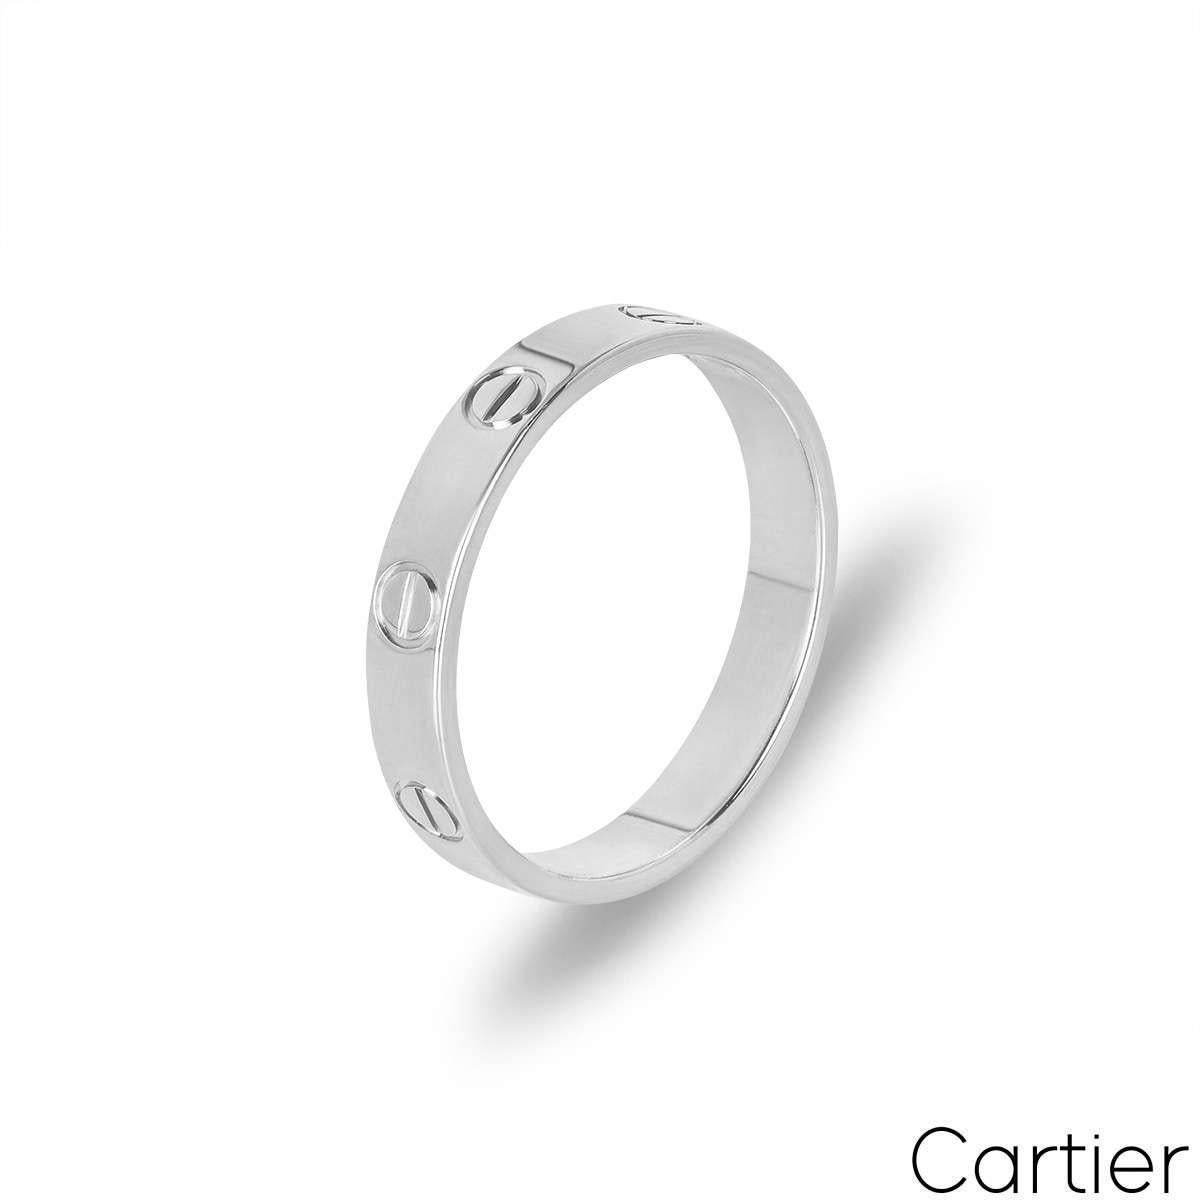 An 18k white gold Cartier wedding band from the Love collection. The ring comprises of the iconic screw motifs and is a size UK L - EU 51. Measuring 3.6mm in width with a gross weight of 3.13 grams.

Comes complete with a RichDiamonds presentation